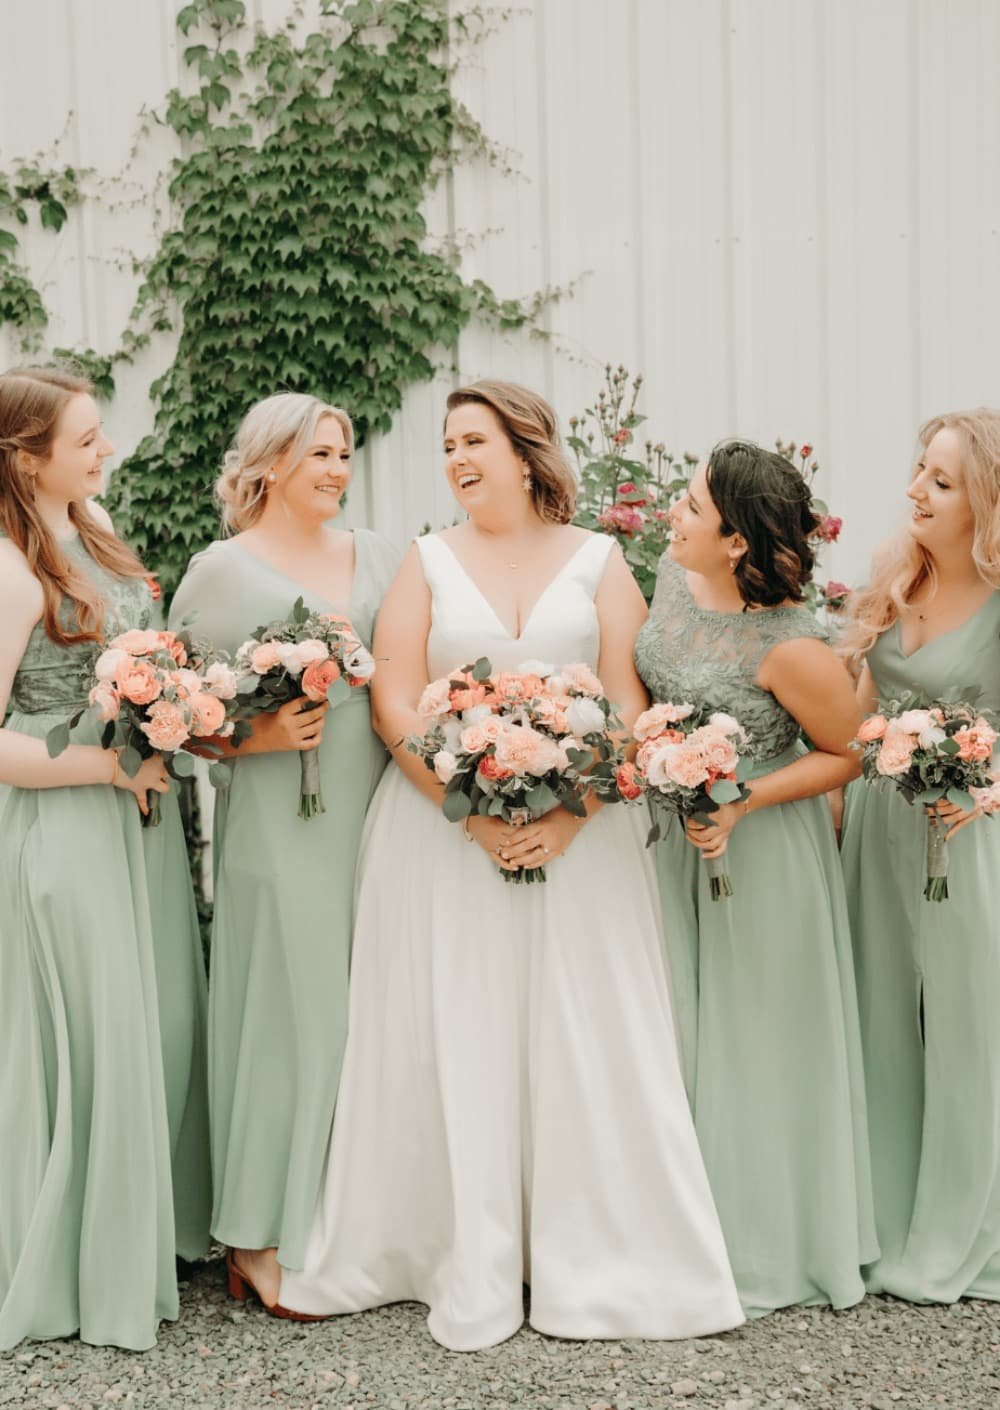 How to Choose the Best Bridesmaid Dress Colors